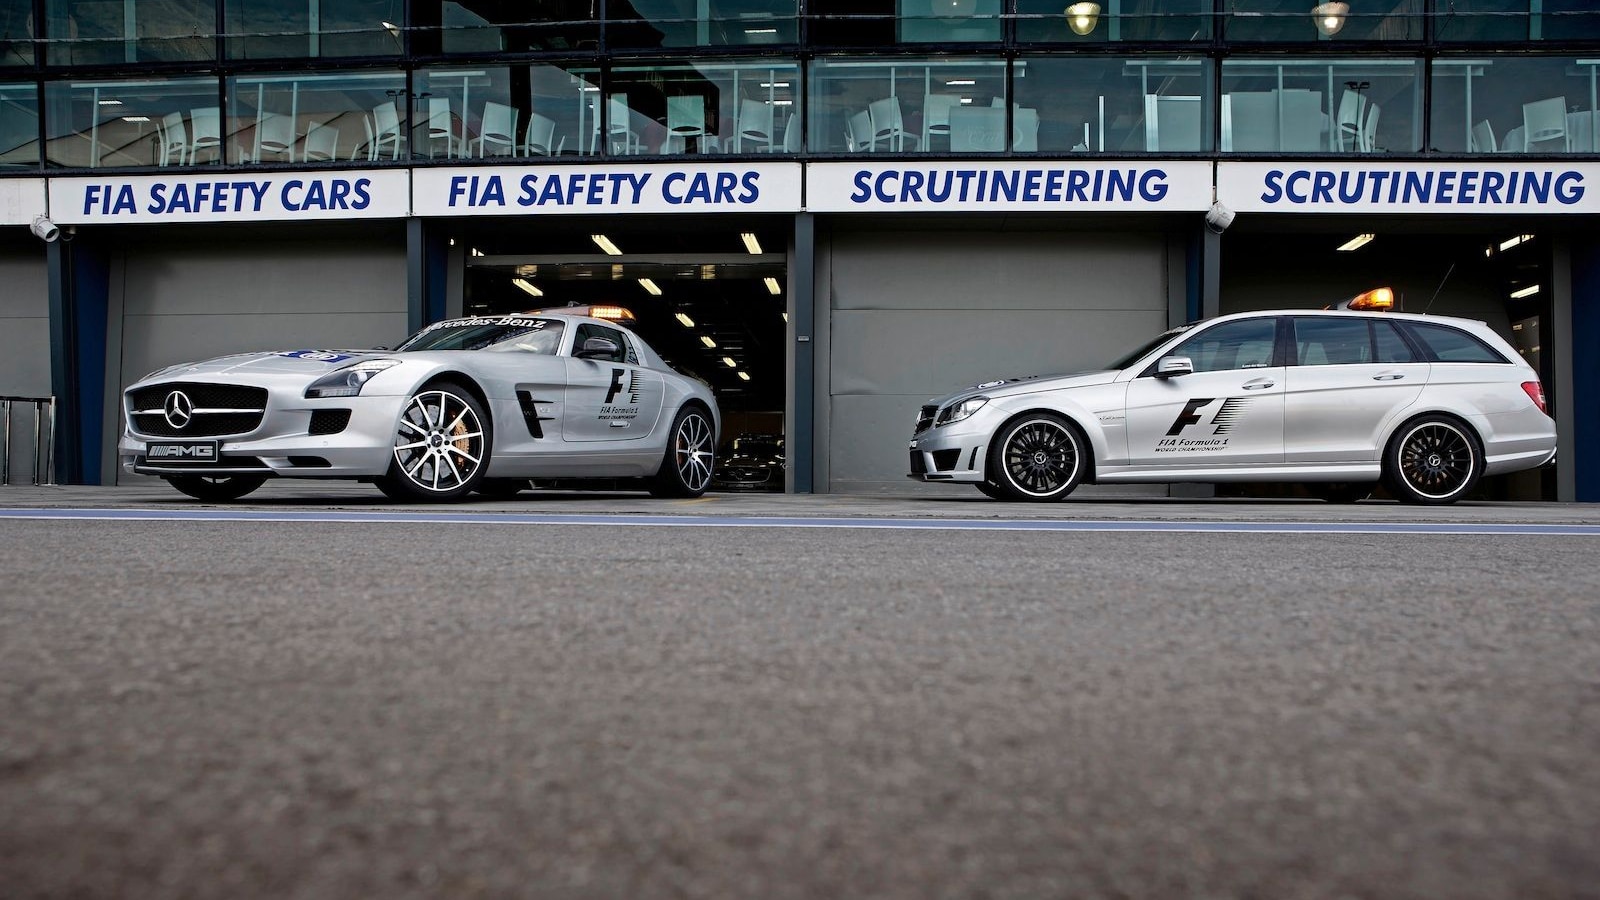 The Mercedes-Benz AMG F1 safety vehicles for the 2013 season